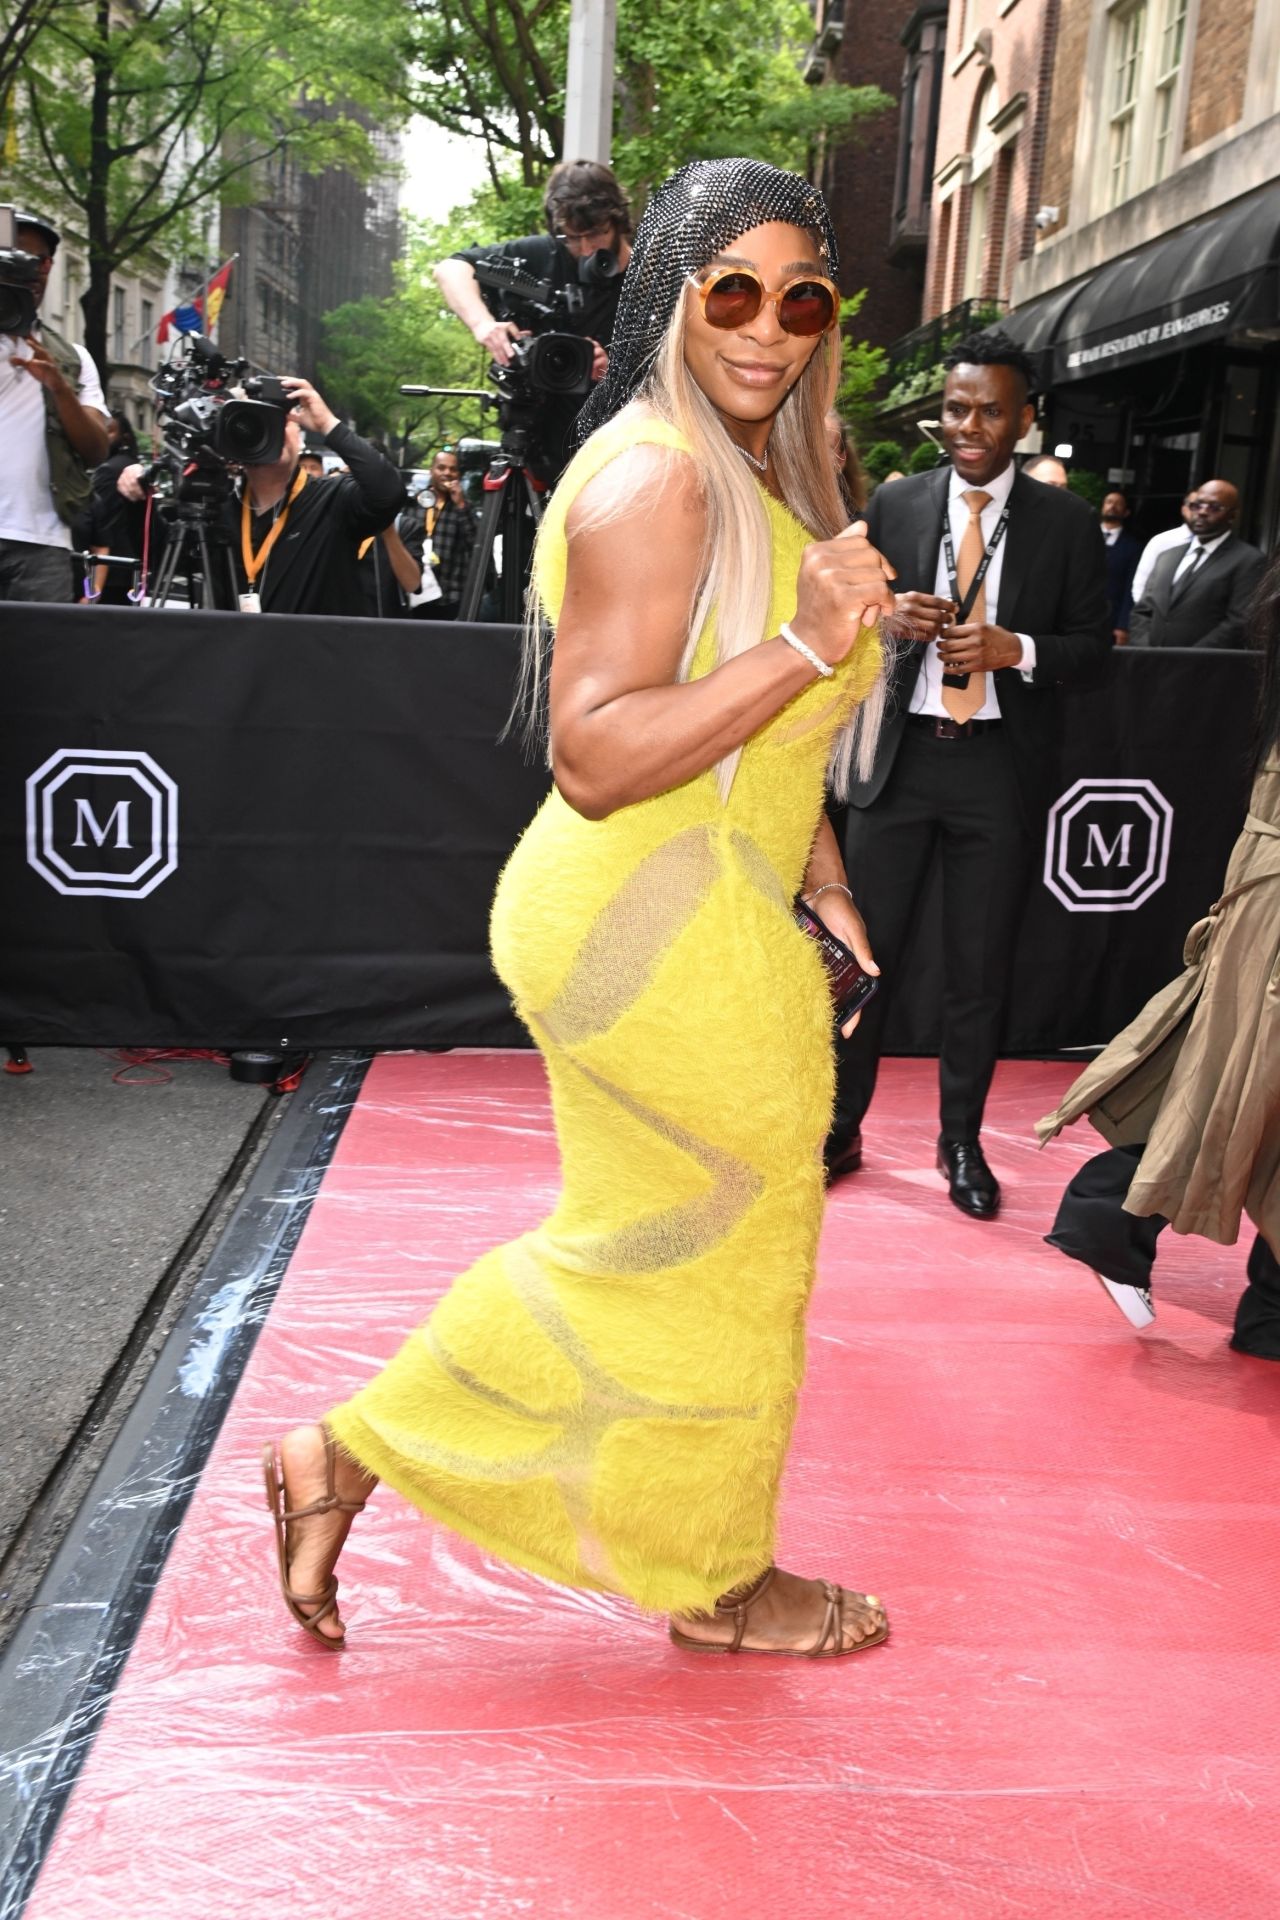 SERENA WILLIAMS IN A BRIGHT YELLOW DRESS IN NEW YORK6